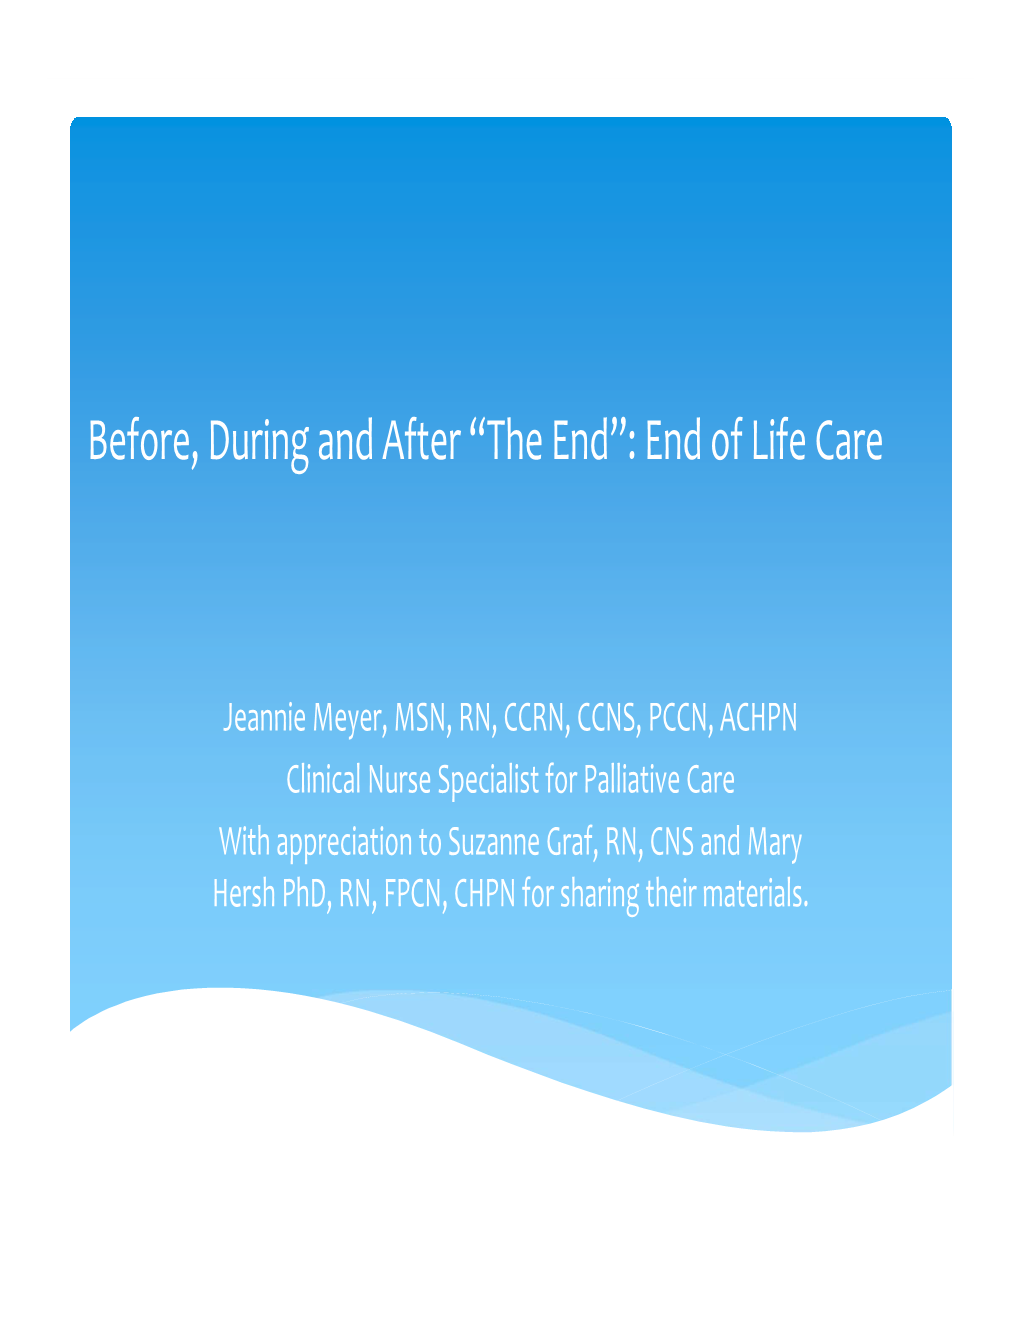 Before, During and After “The End”: End of Life Care